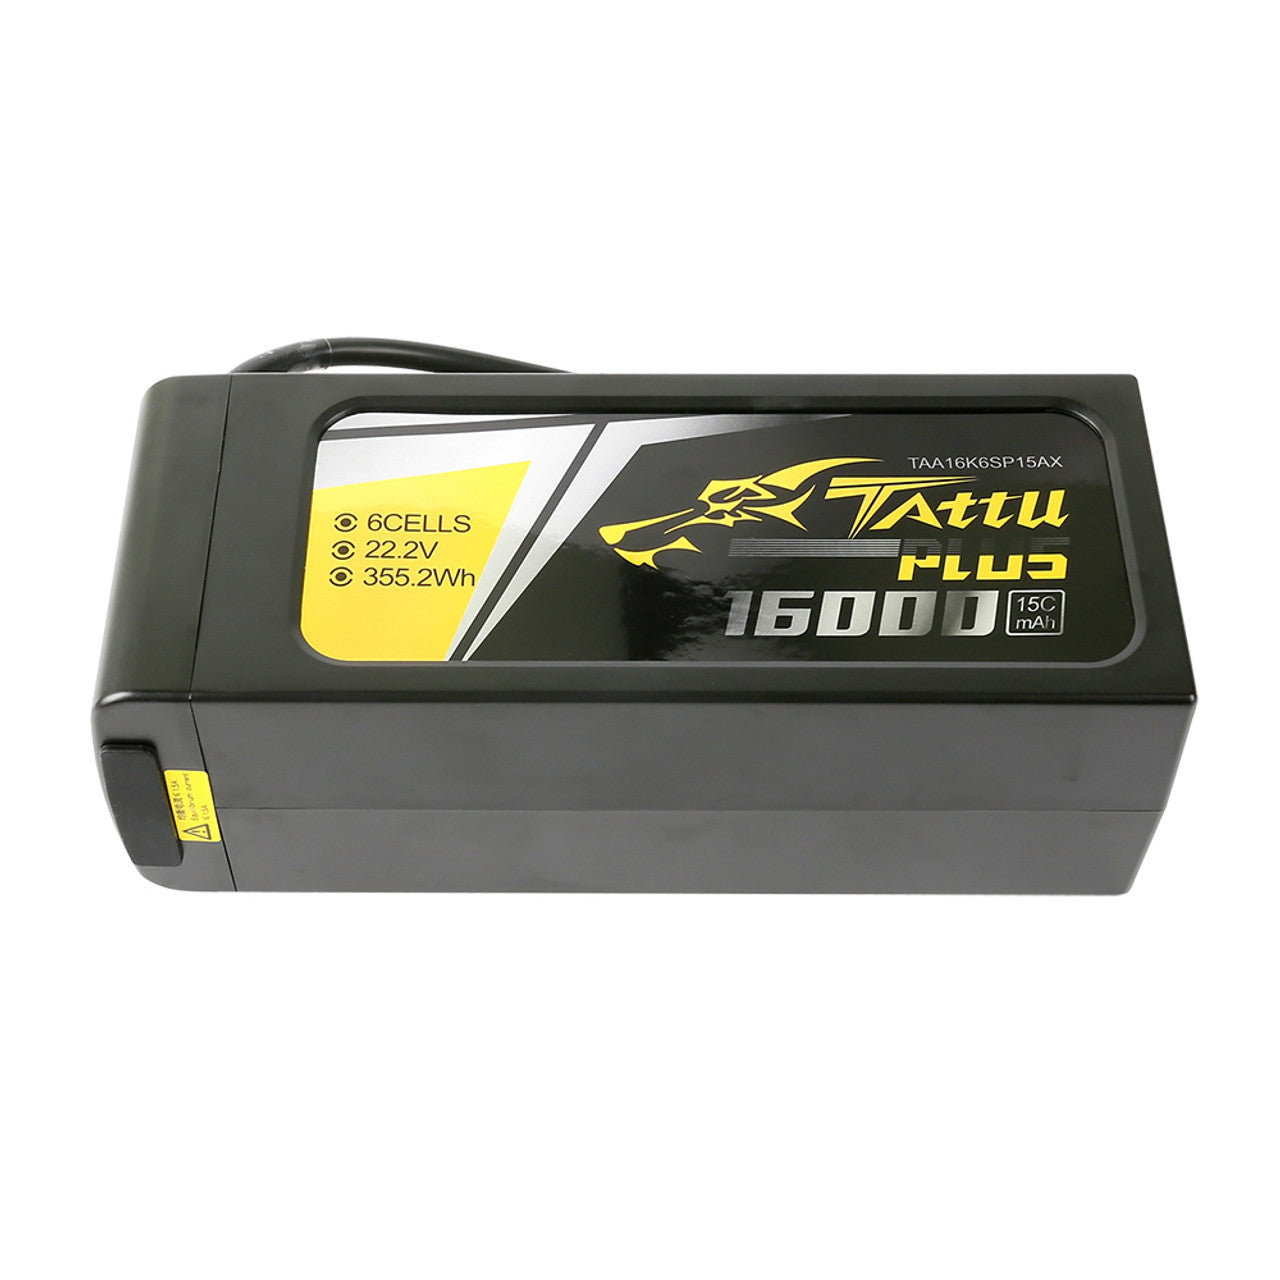 Tattu Plus 16000mAh 6S 15C 22.2V Lipo Battery, Lipoly battery pack with 16000mAh capacity, 22.2V voltage, and 15C discharge rate.